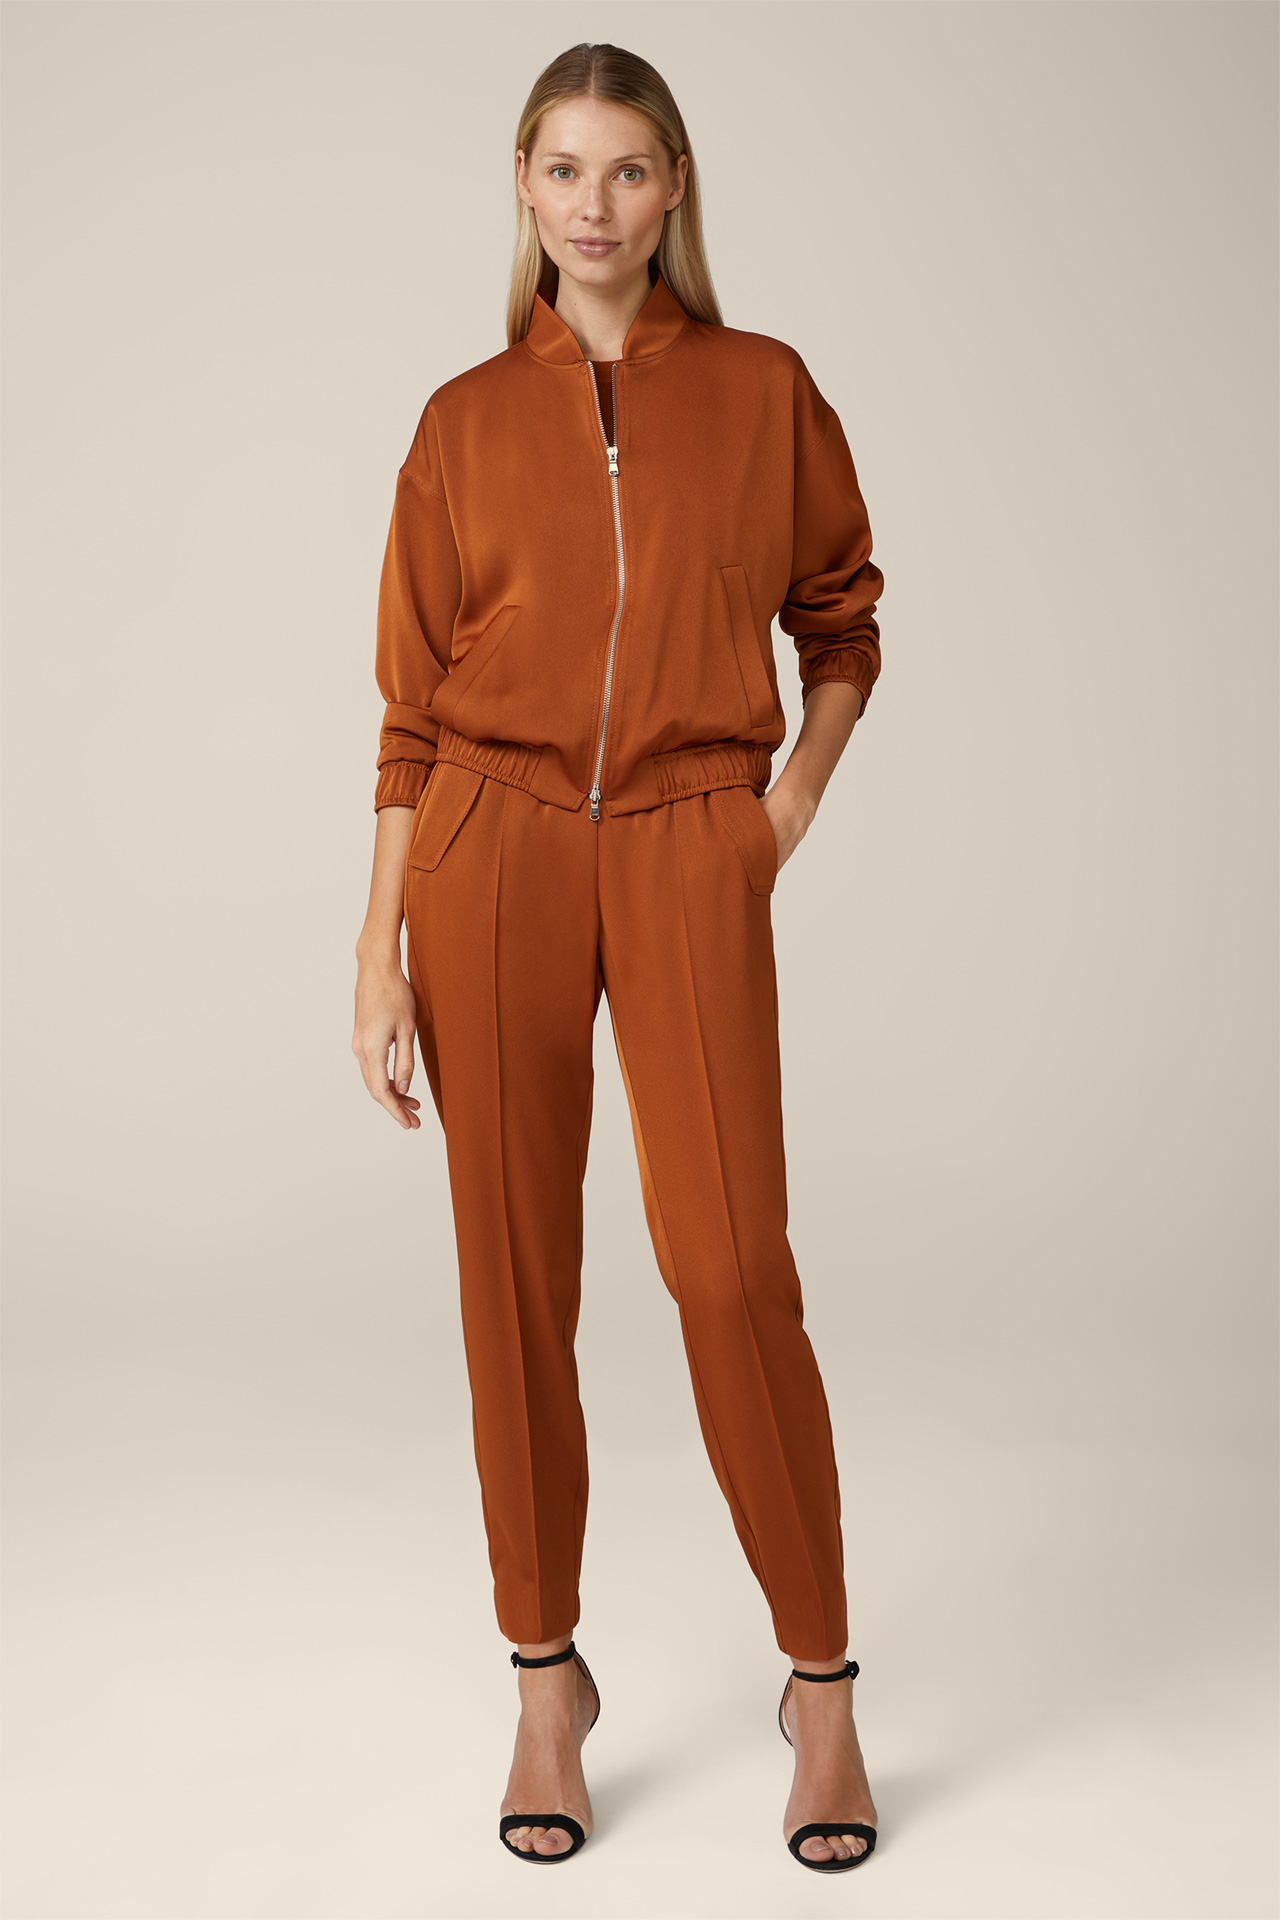 Crêpe Jogger-Style Trousers in Copper